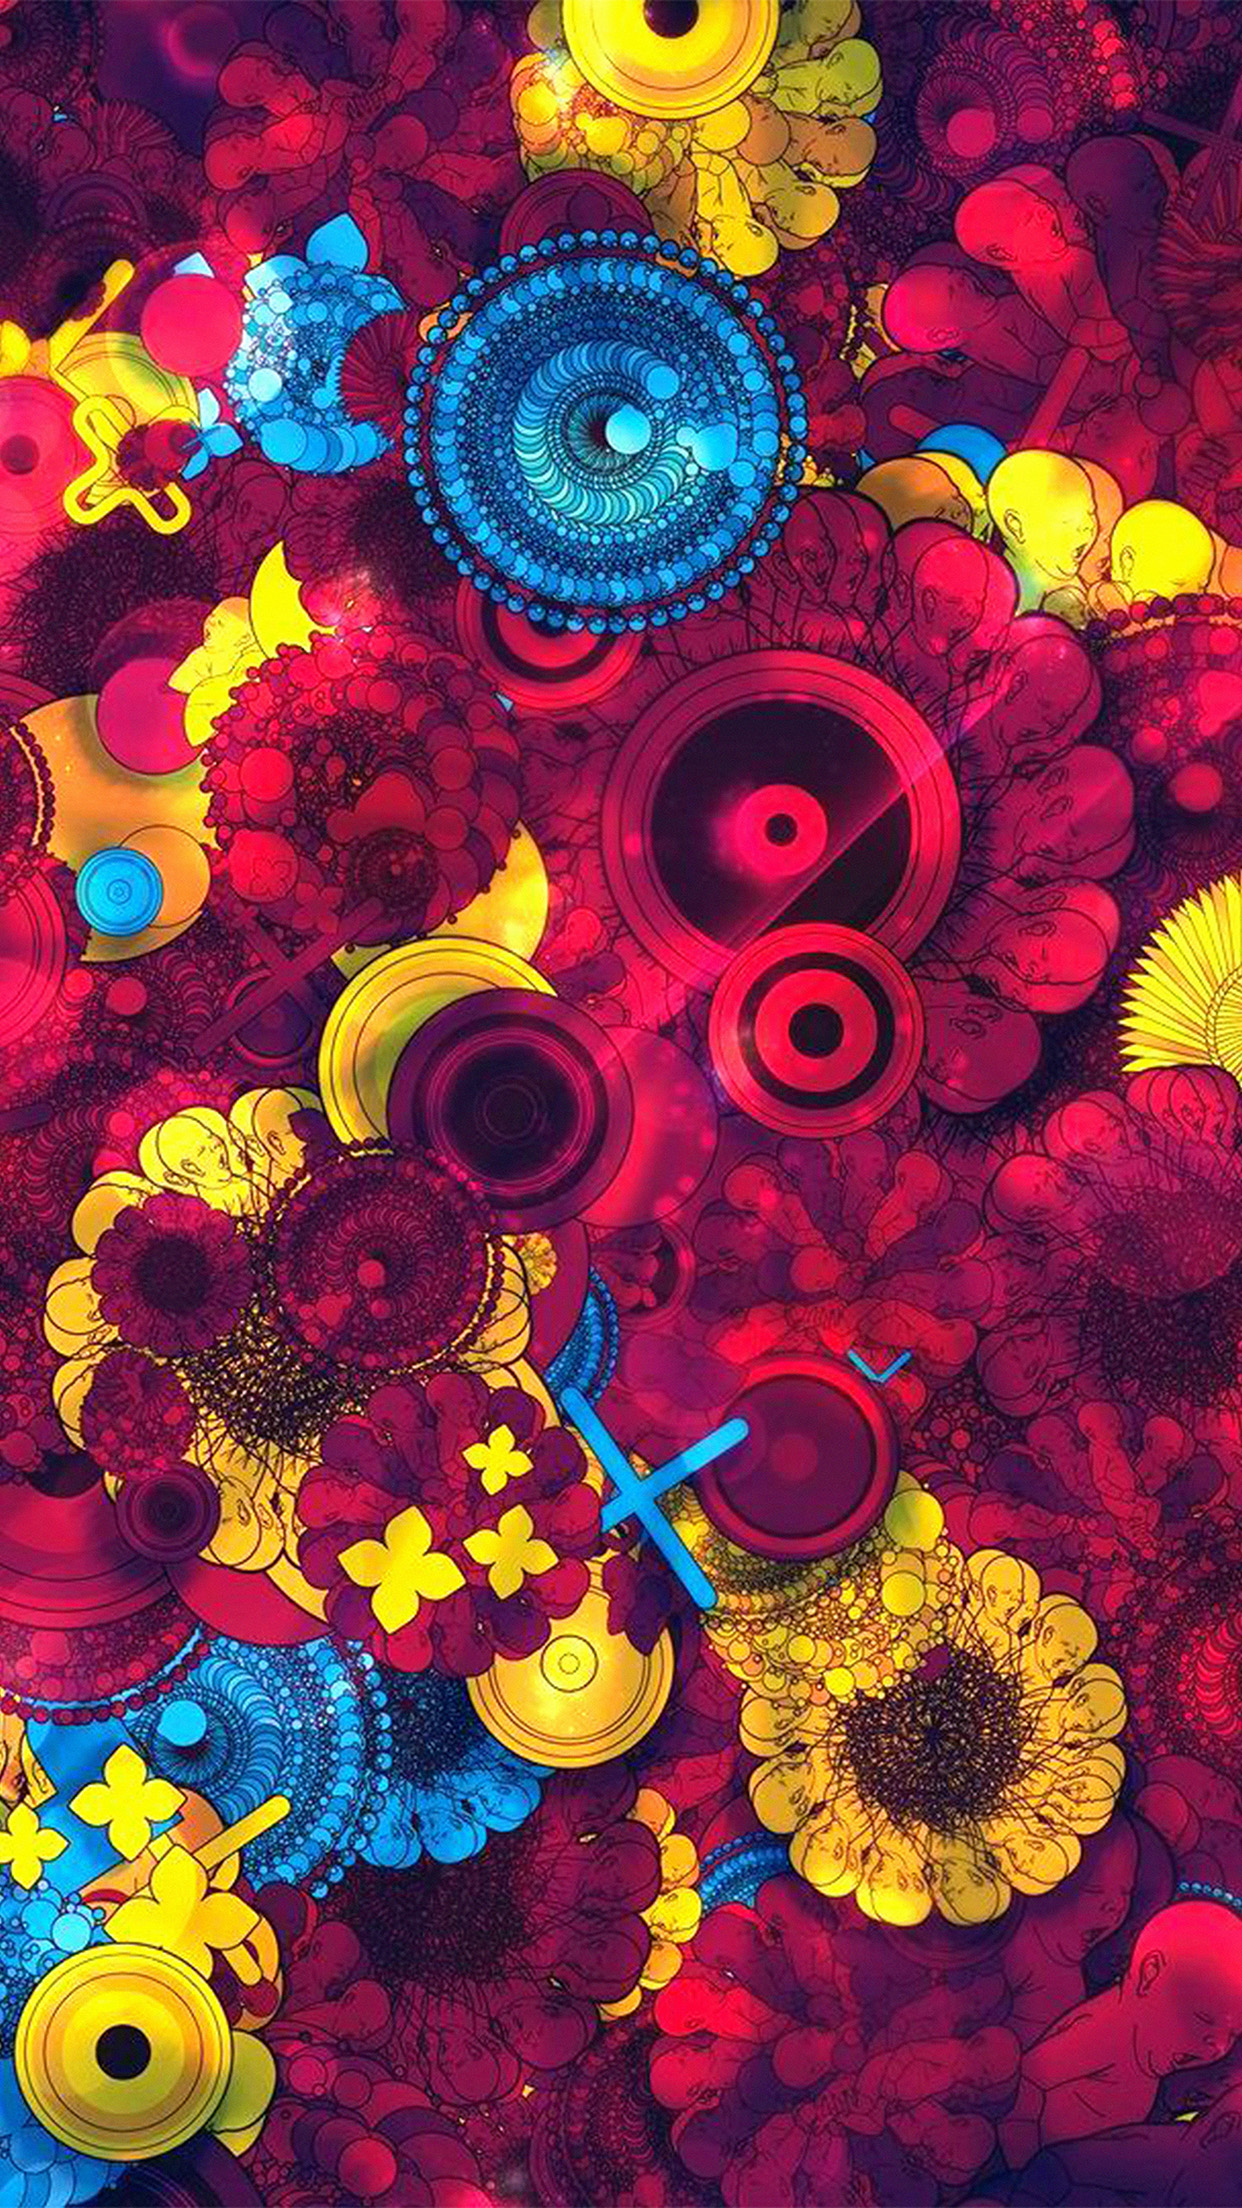 abstract wallpaper for android,pattern,psychedelic art,colorfulness,illustration,art